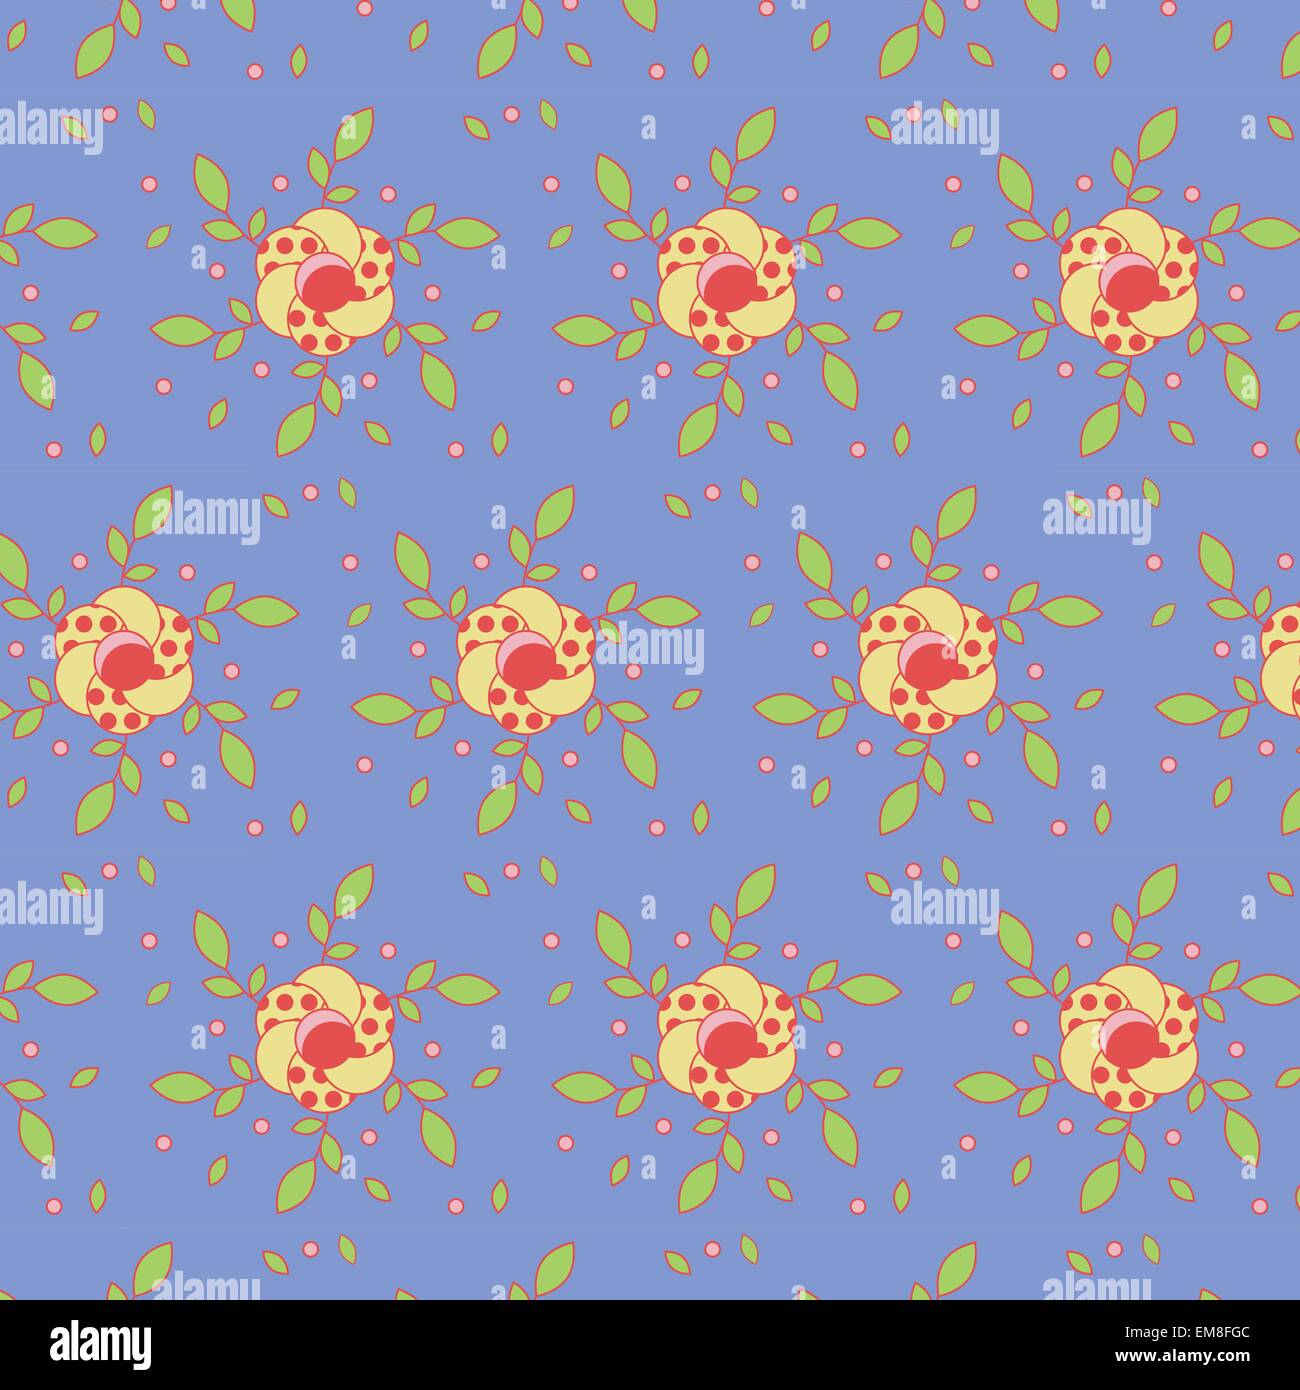 Seamless Flower Pattern Colorful Set Stock Vector